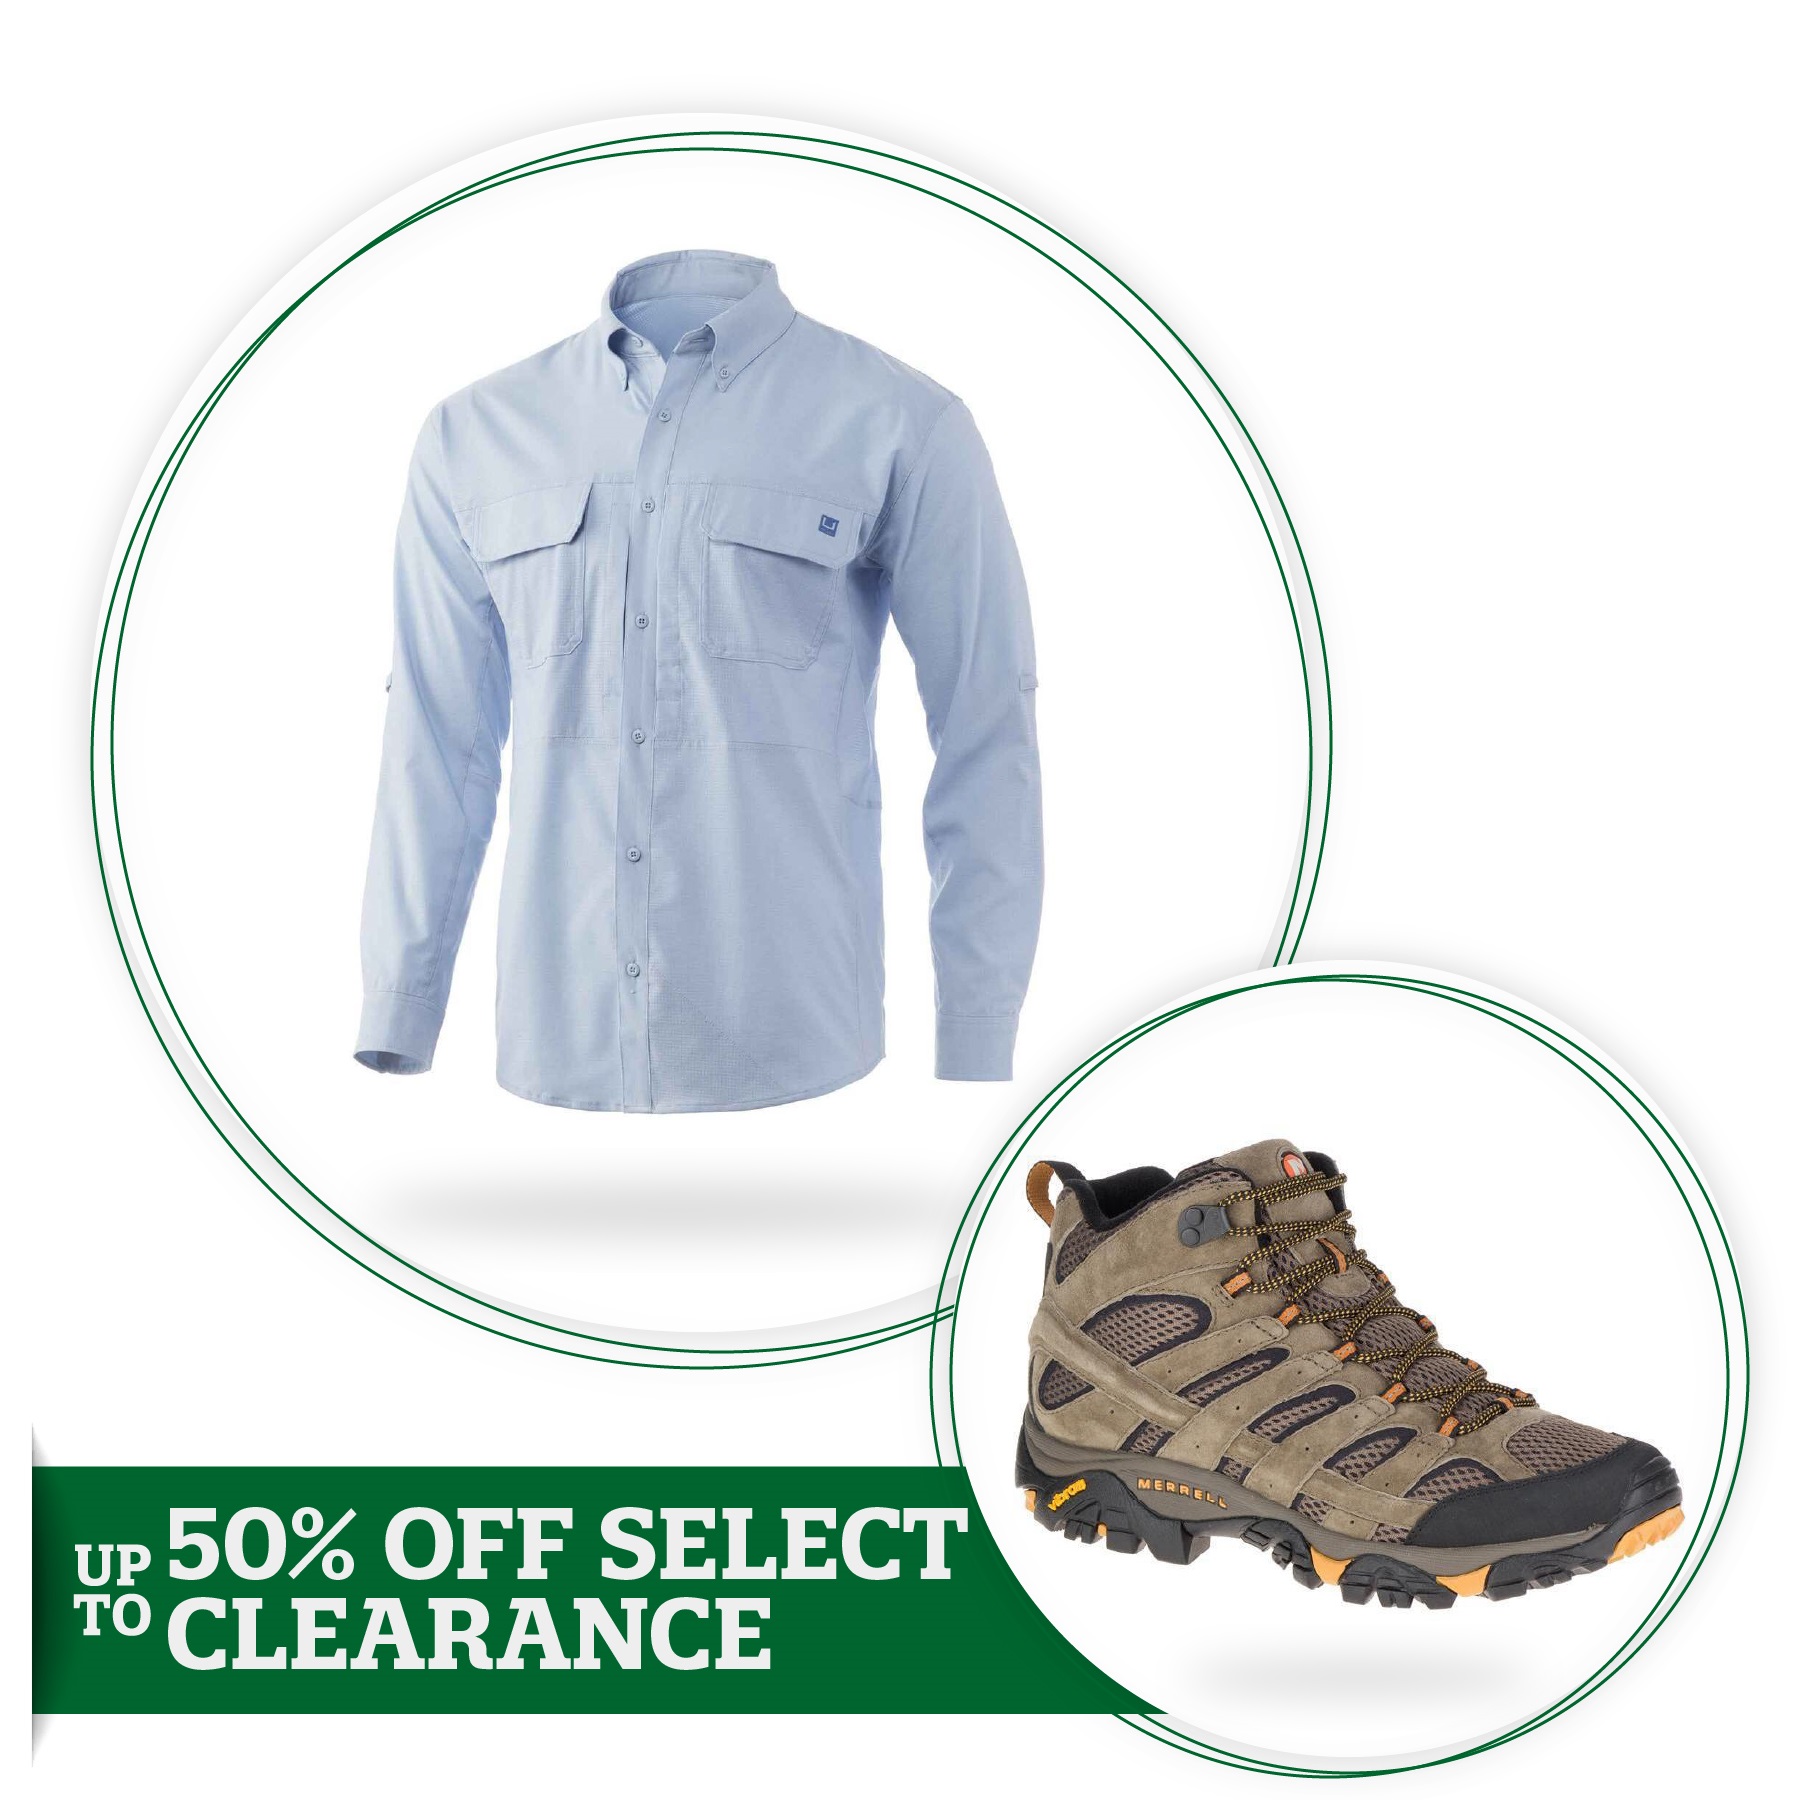 Up to 50% Off Clothing & Footwear Clearance